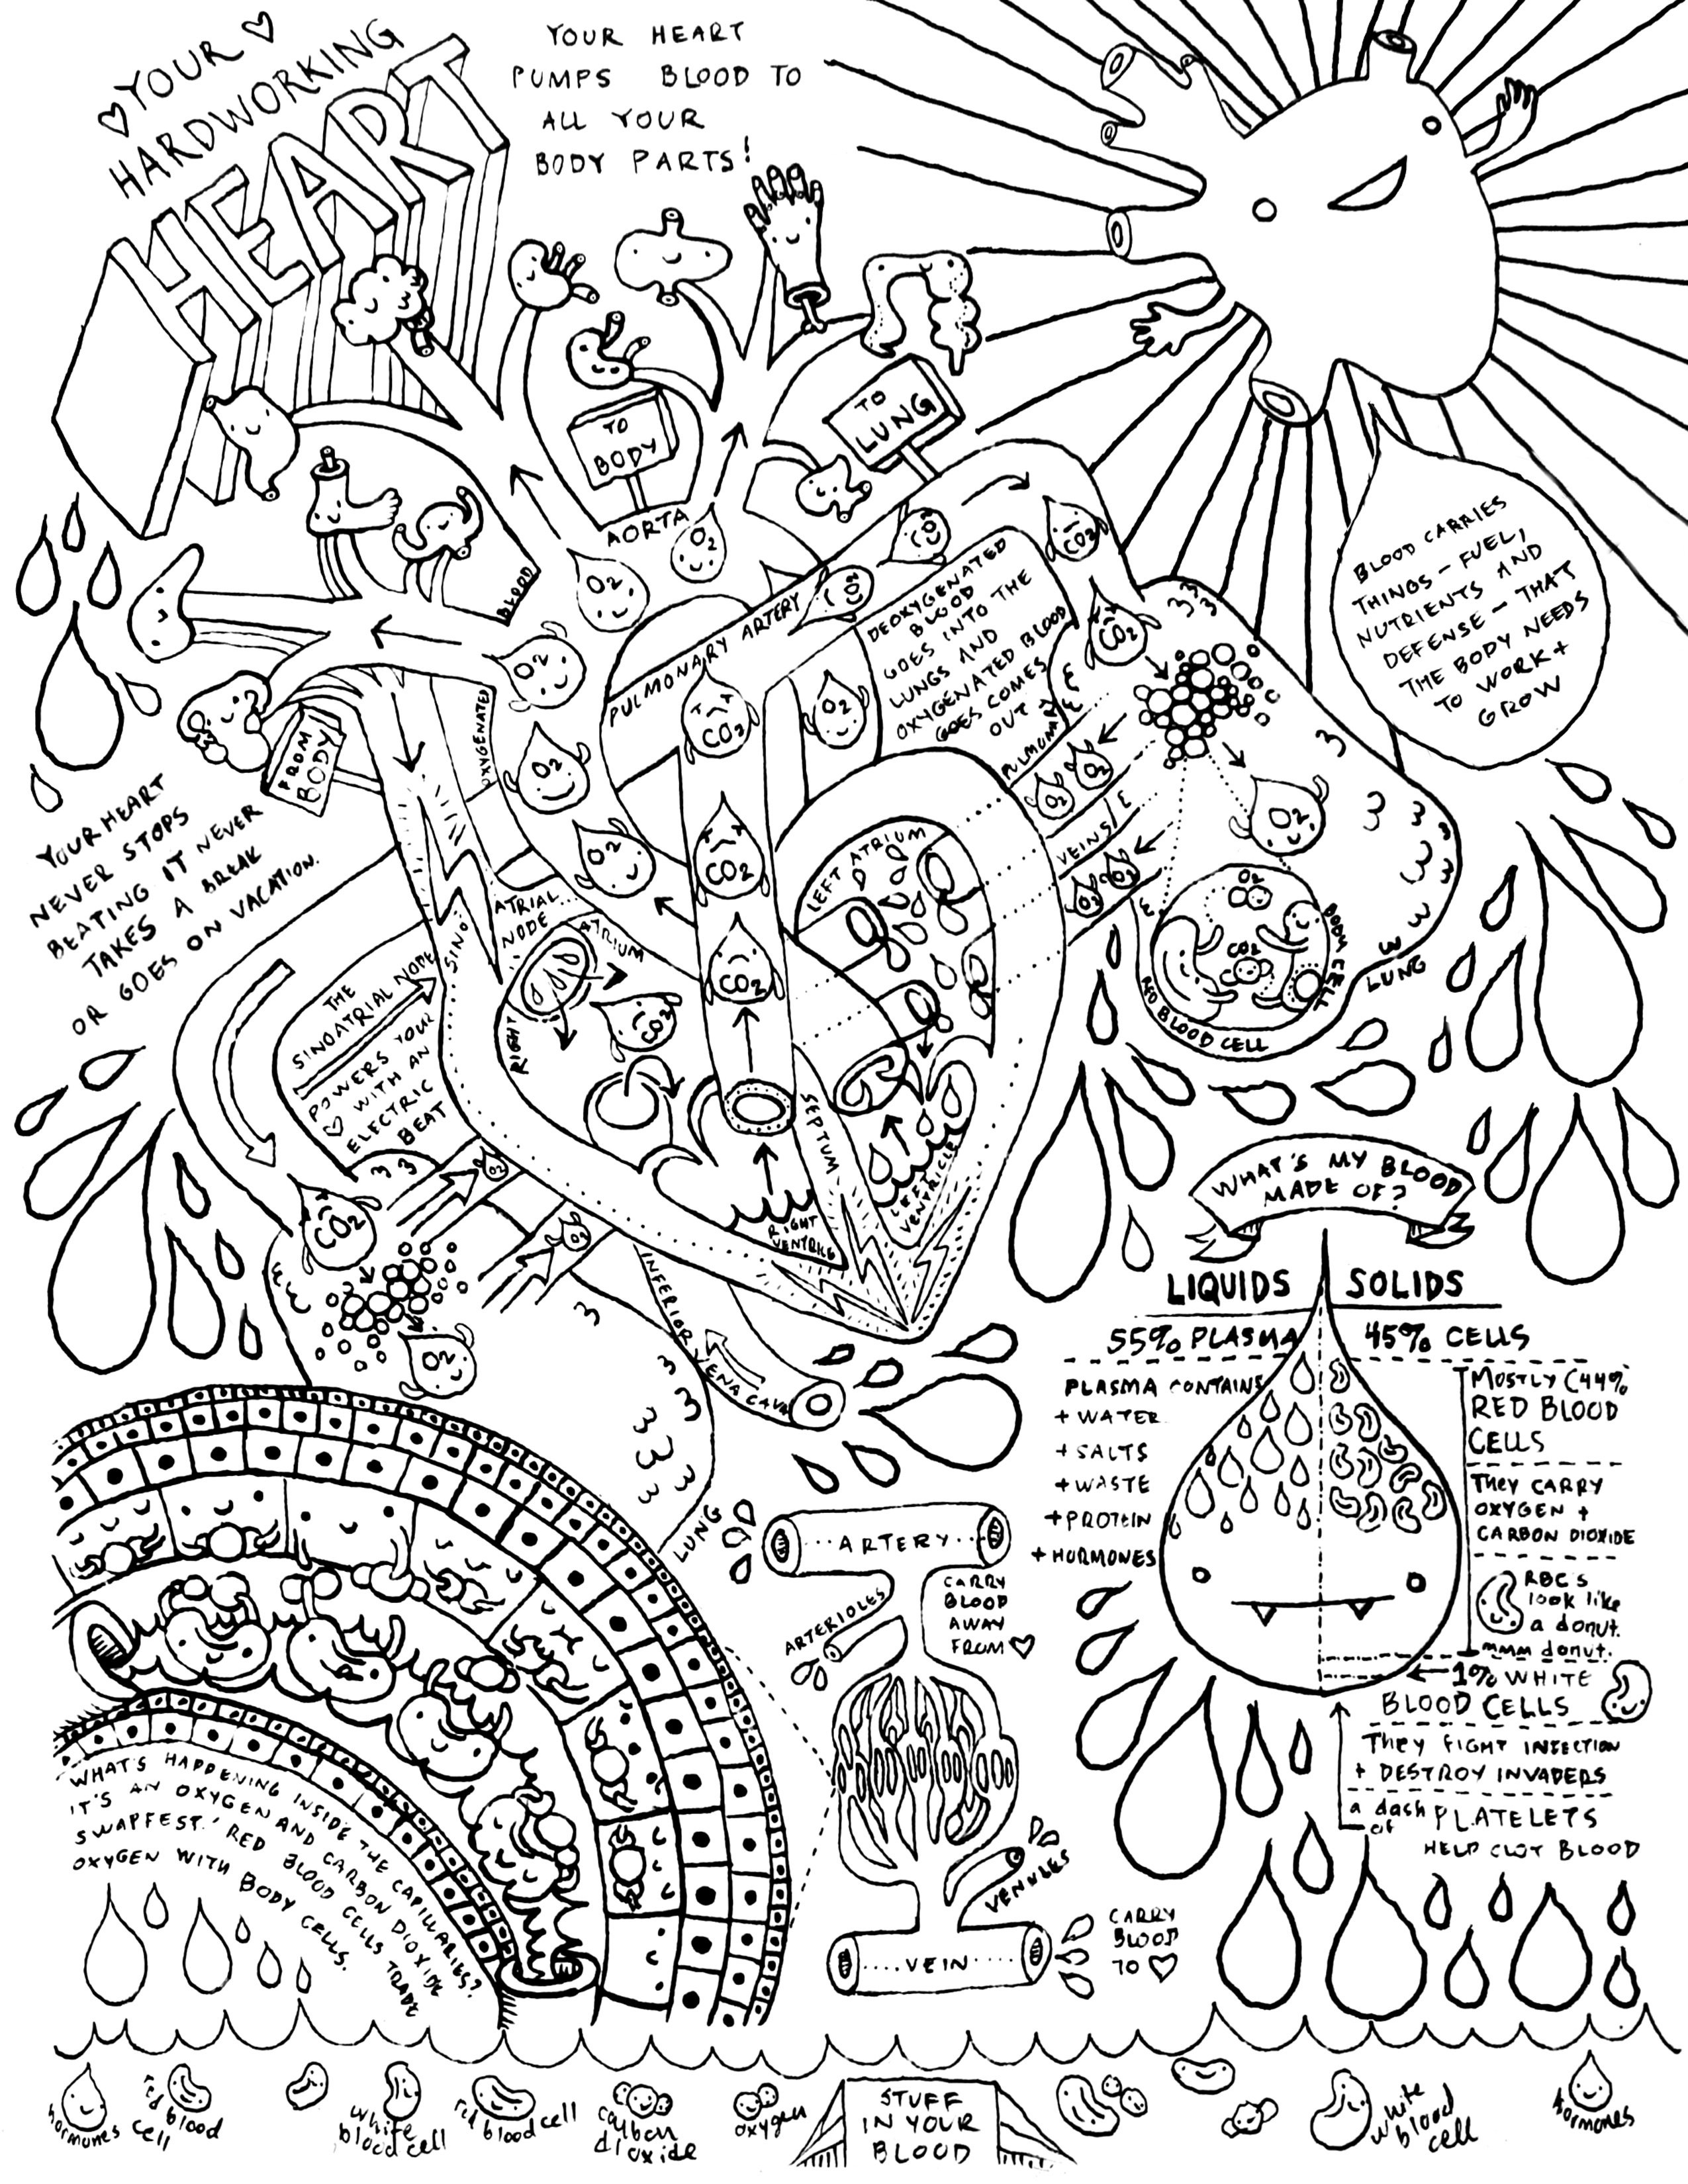 Heart + Circulatory System Coloring Page | I Heart Guts